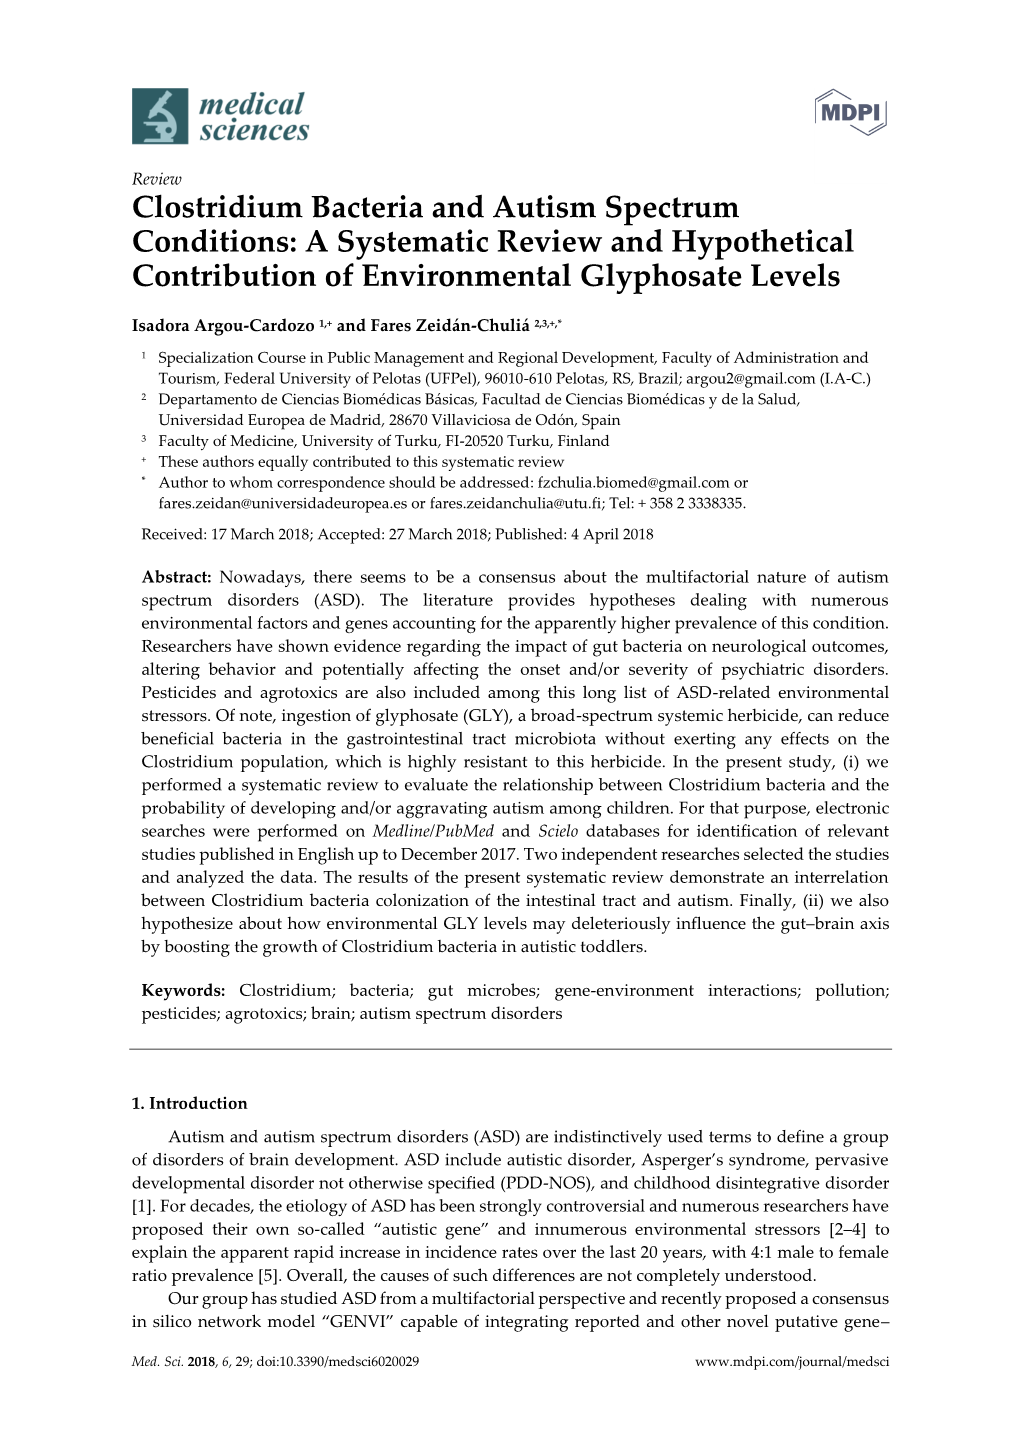 Clostridium Bacteria and Autism Spectrum Conditions: a Systematic Review and Hypothetical Contribution of Environmental Glyphosate Levels